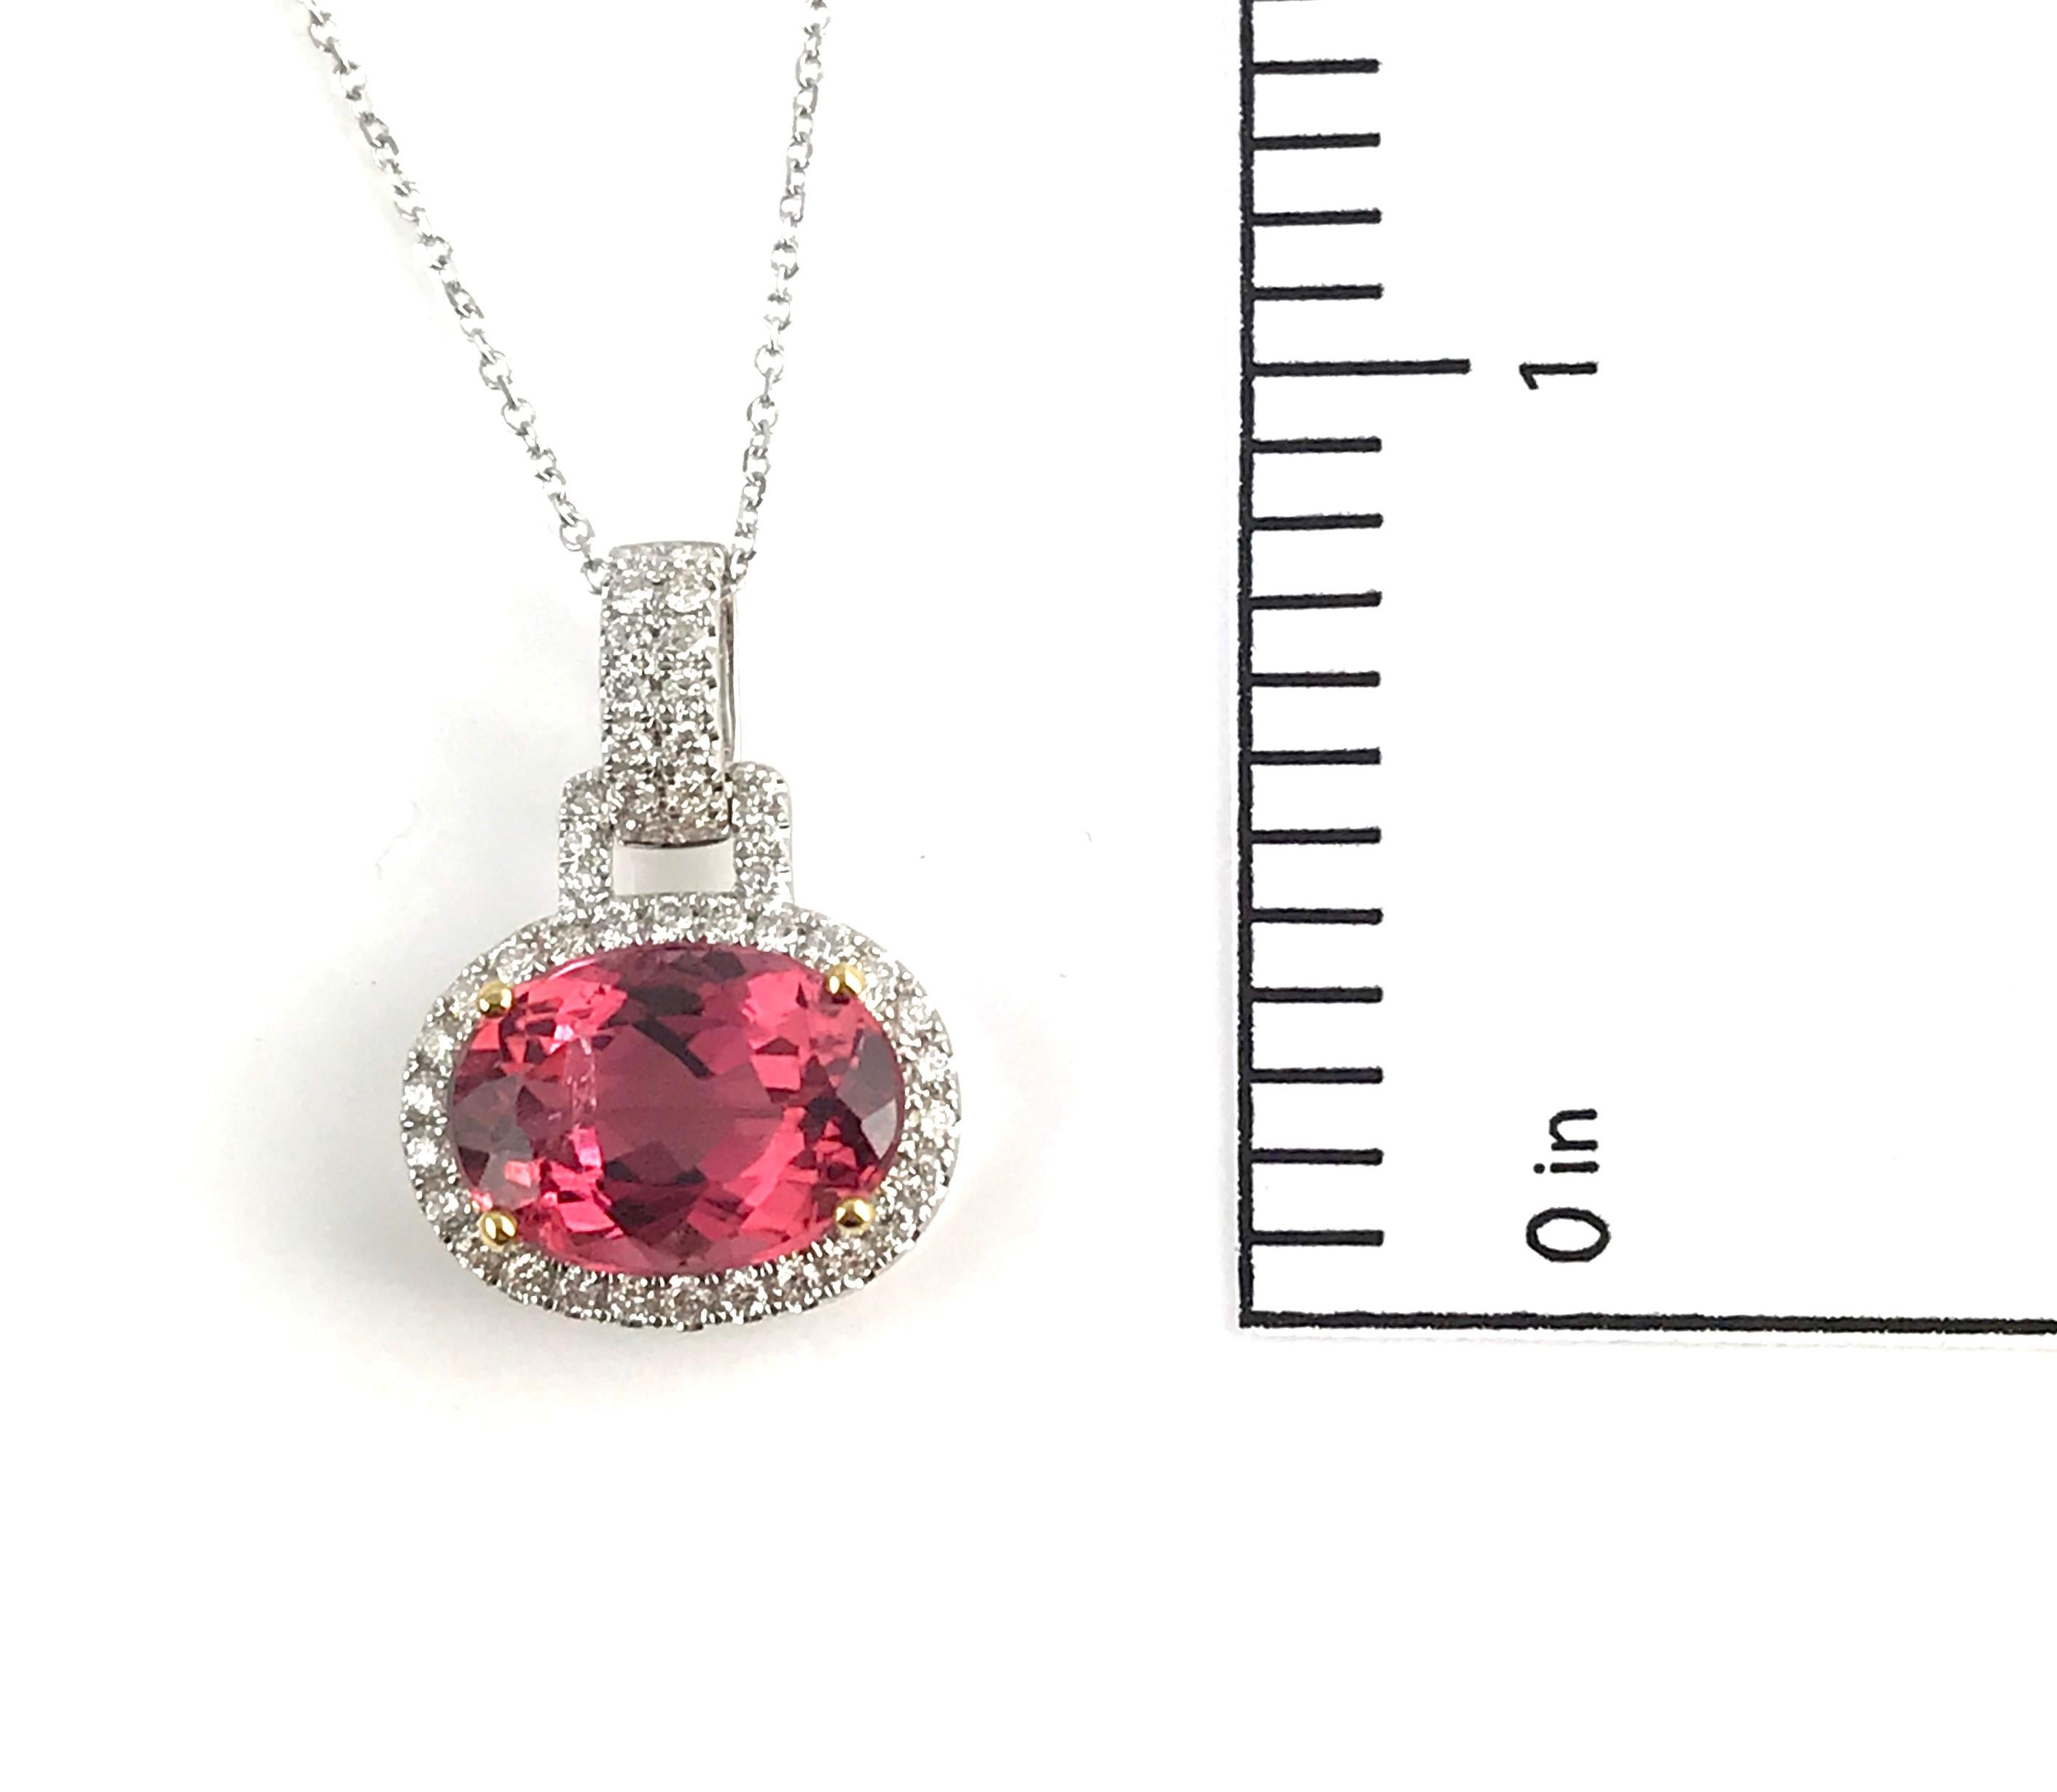 This striking pendant boasts a 3.90 carat oval-cut raspberry pink tourmaline centerpiece, elegantly nestled in an 18k yellow gold setting, and encircled by a halo of round white diamonds. The central gem is further accentuated by a surrounding halo